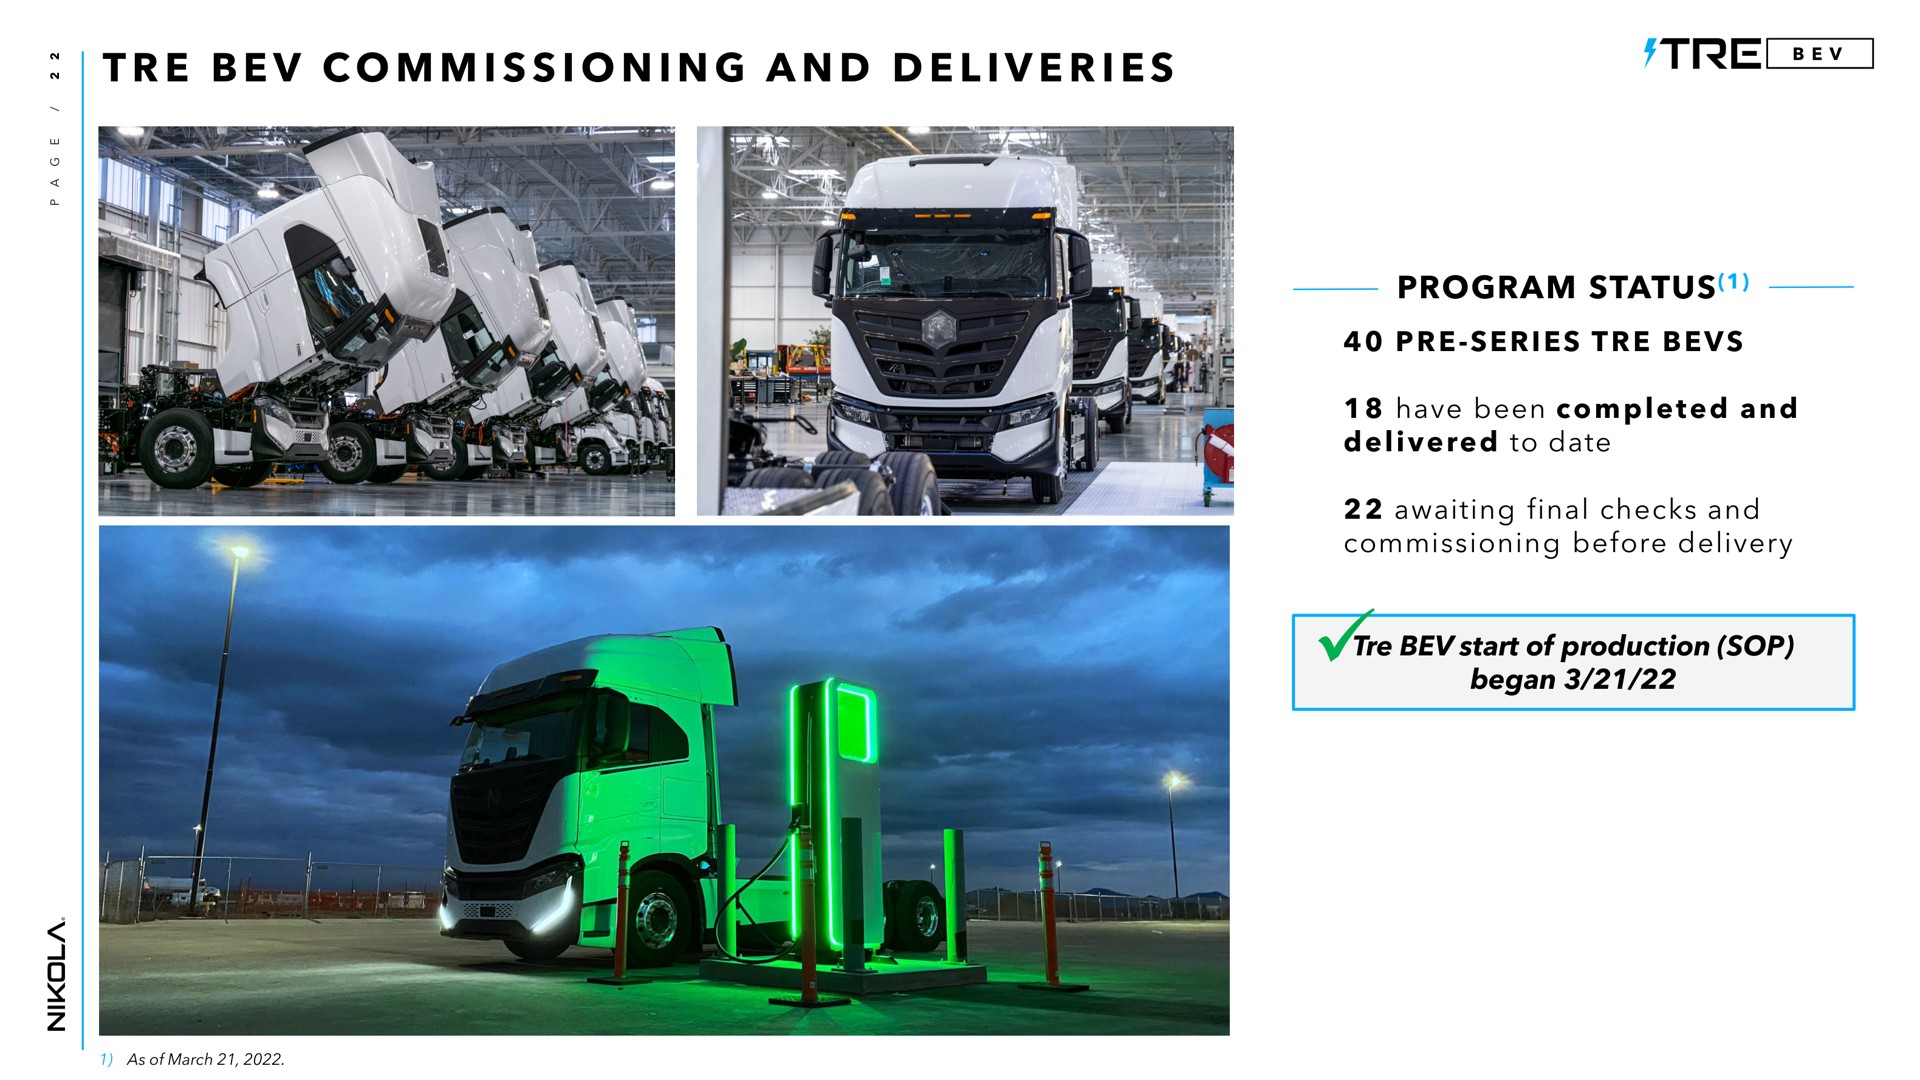 i i i a i i program status commissioning and deliveries series have been completed and delivered to date awaiting final checks and commissioning before delivery began | Nikola